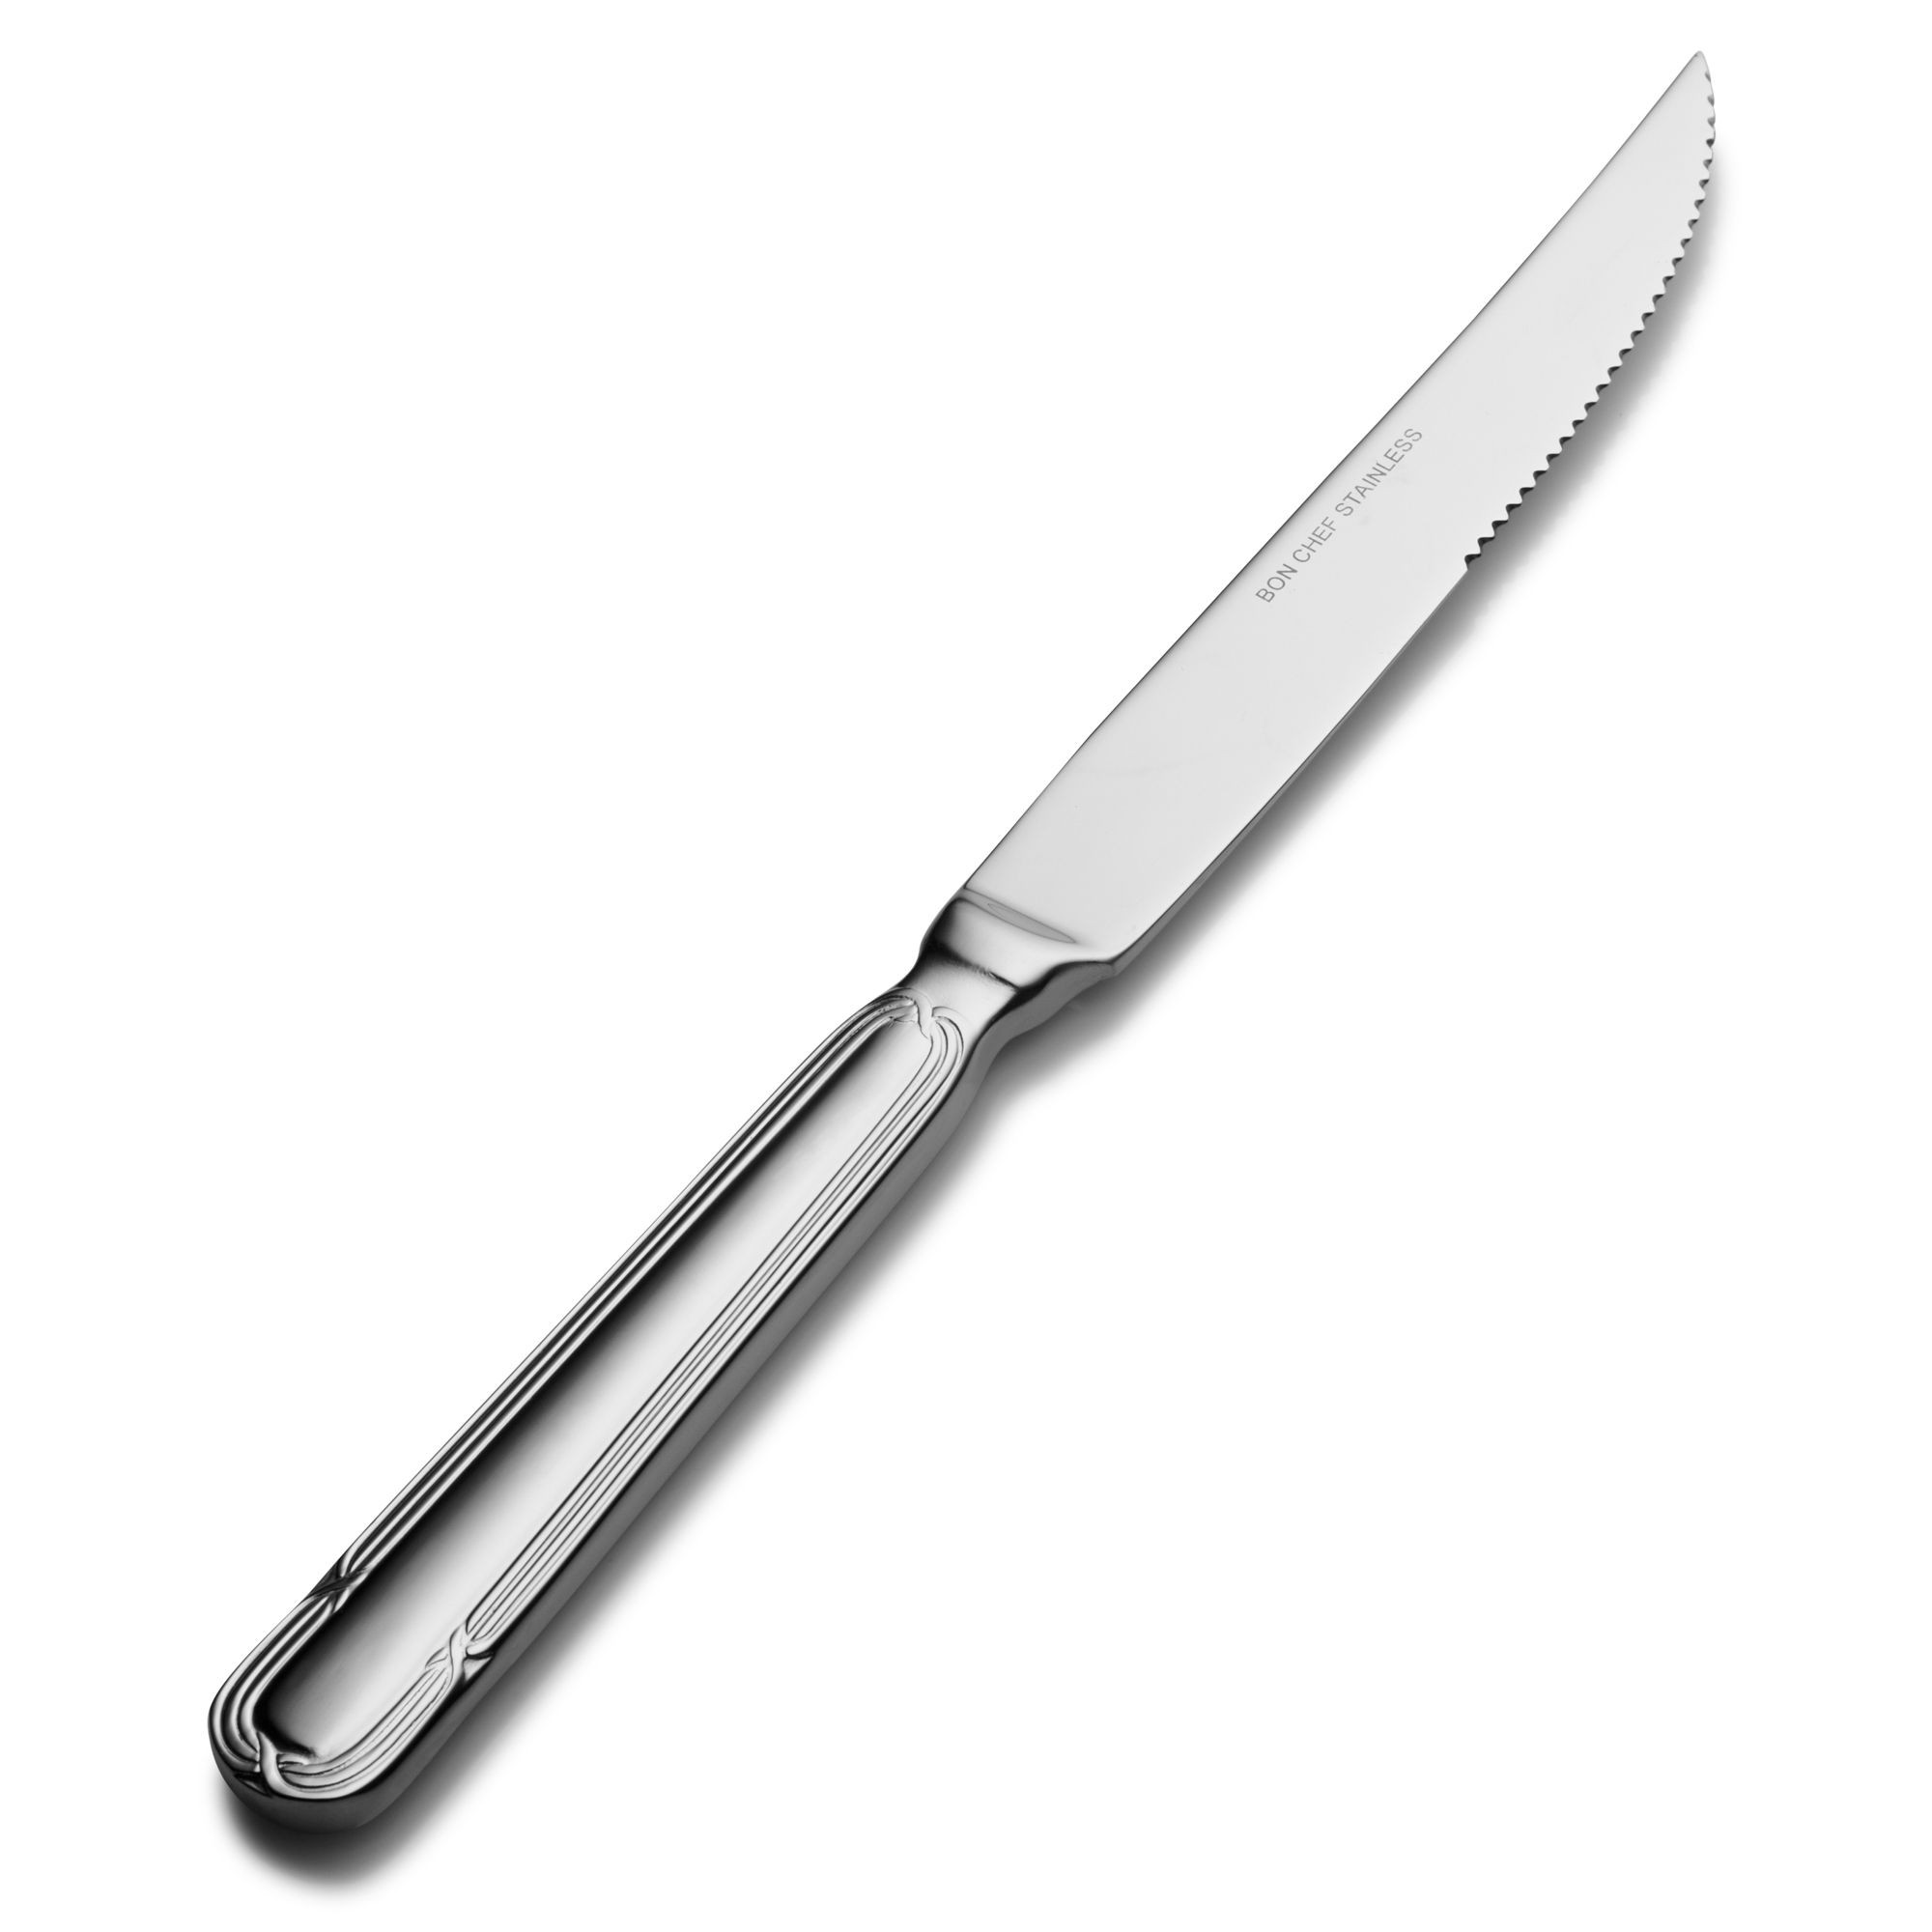 Bon Chef S815 Florence 18/8 Stainless Steel European Solid Handle Steak Knife